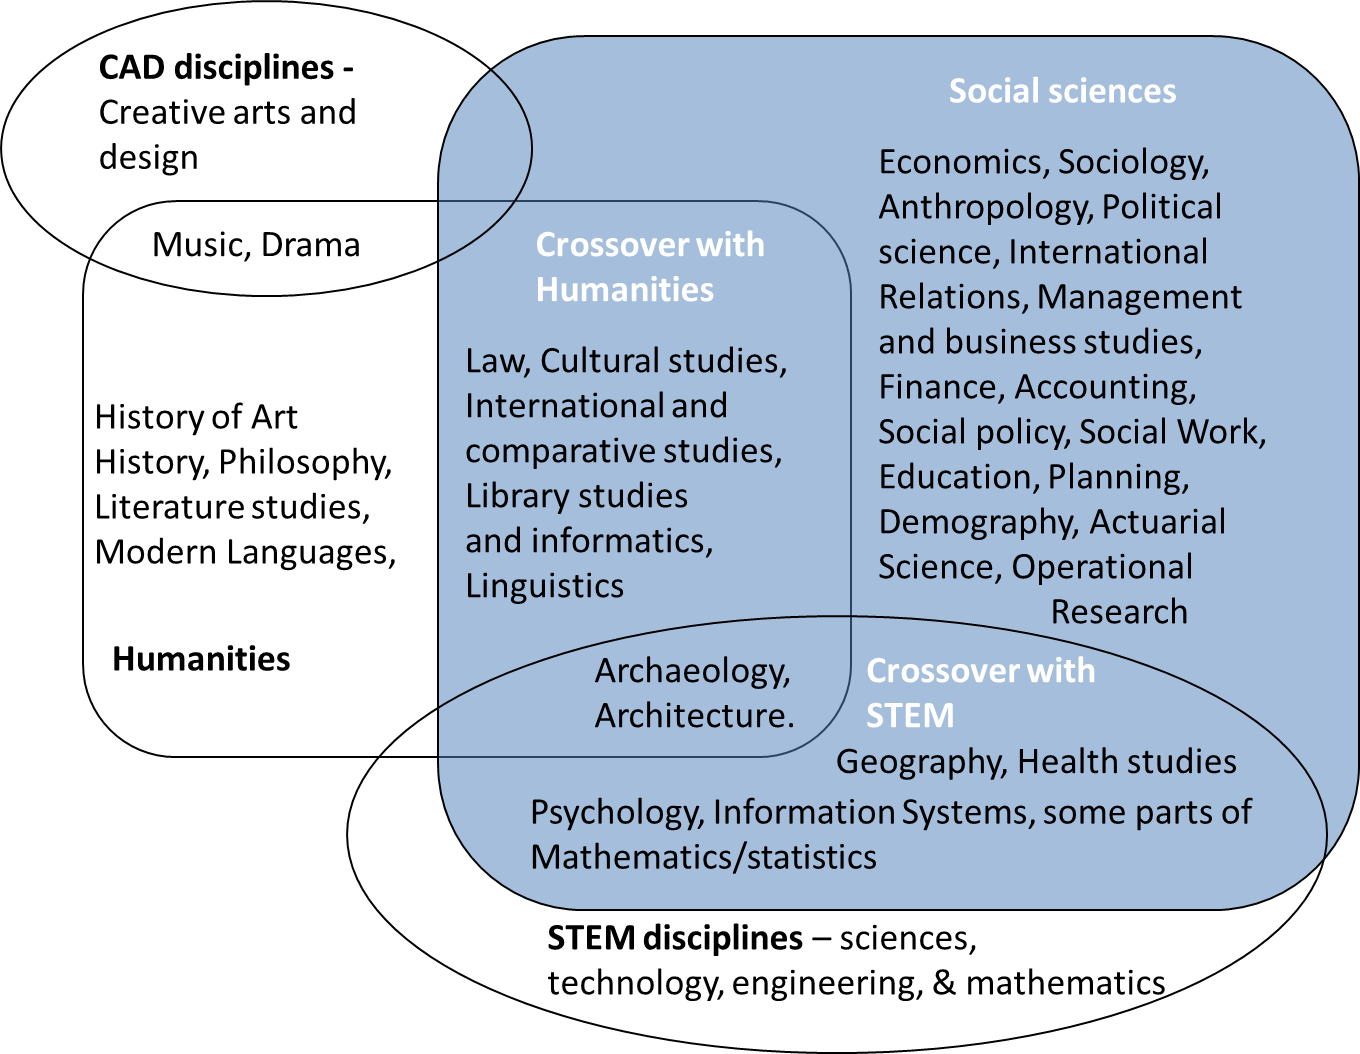 The contemporary social sciences are now converging strongly with STEM